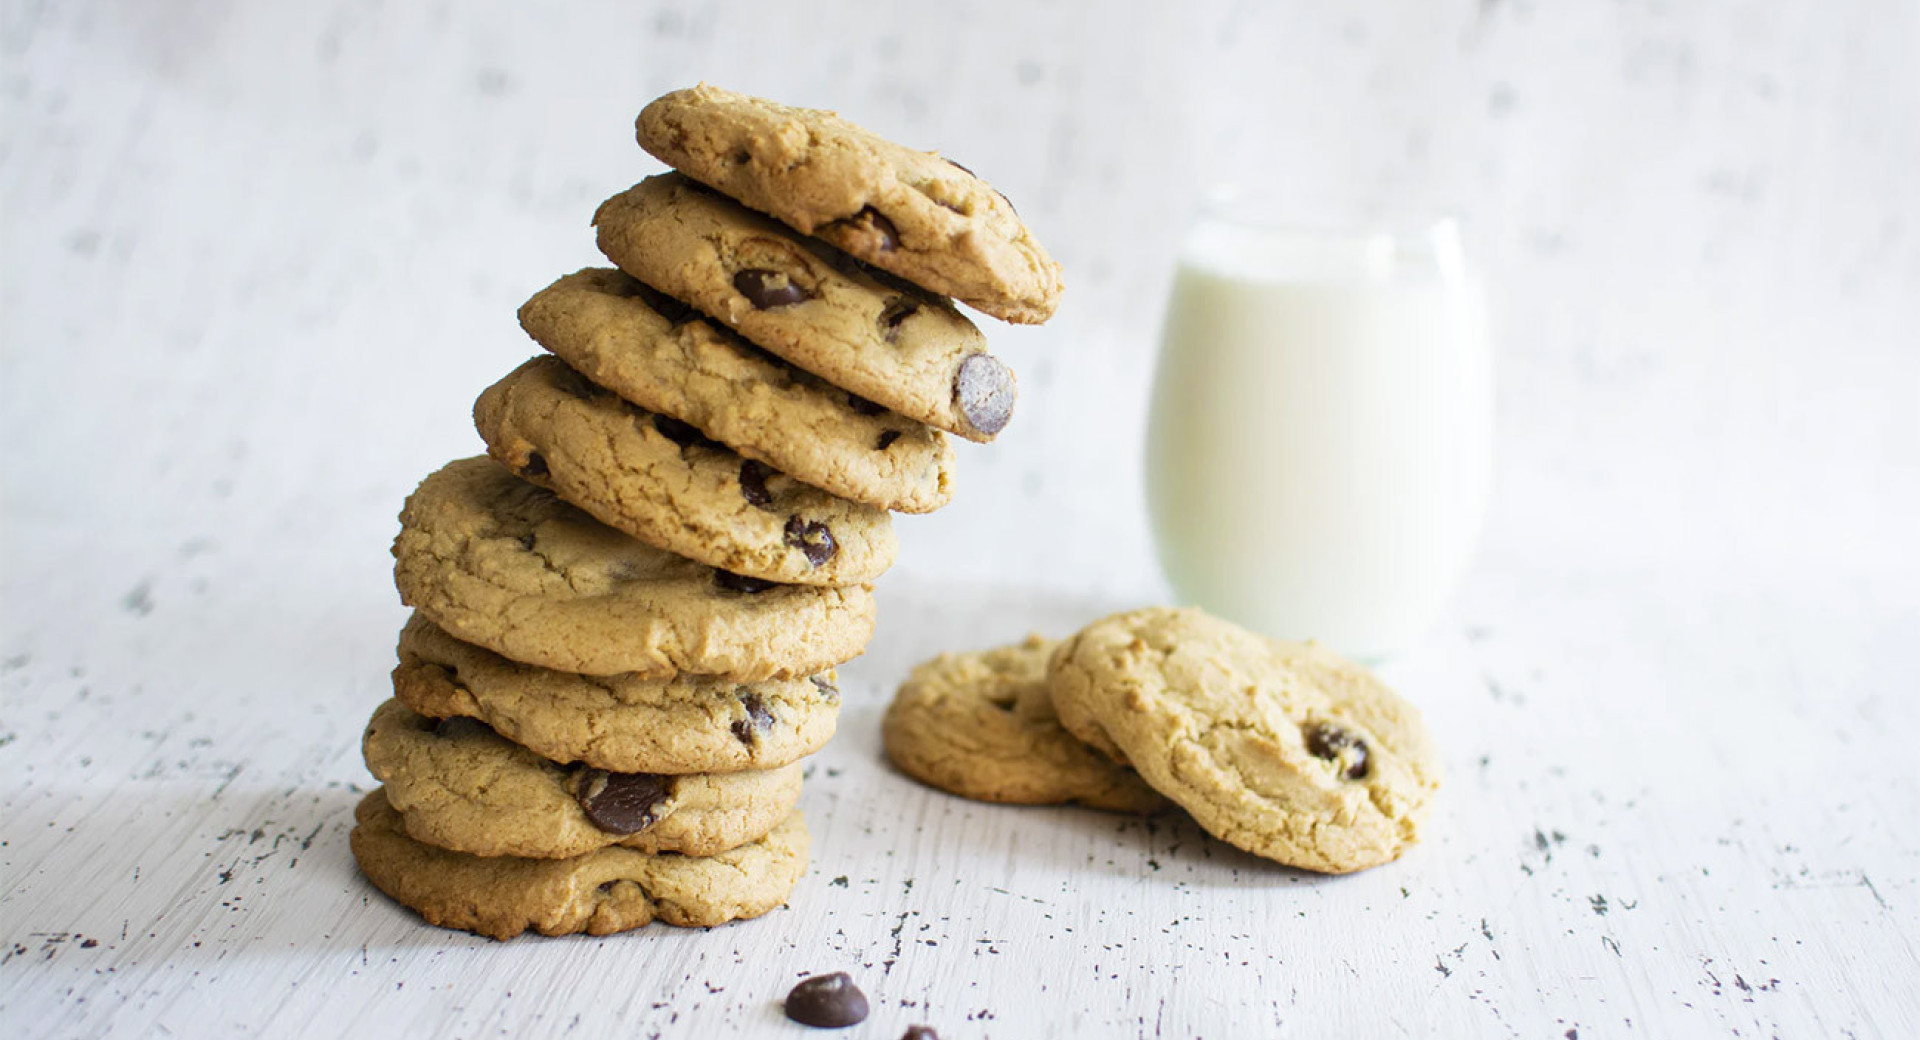 Cookies with chocolate chunks stacked into a tower. Besides two standalone cookies, there's also a glass of milk. The background is white.